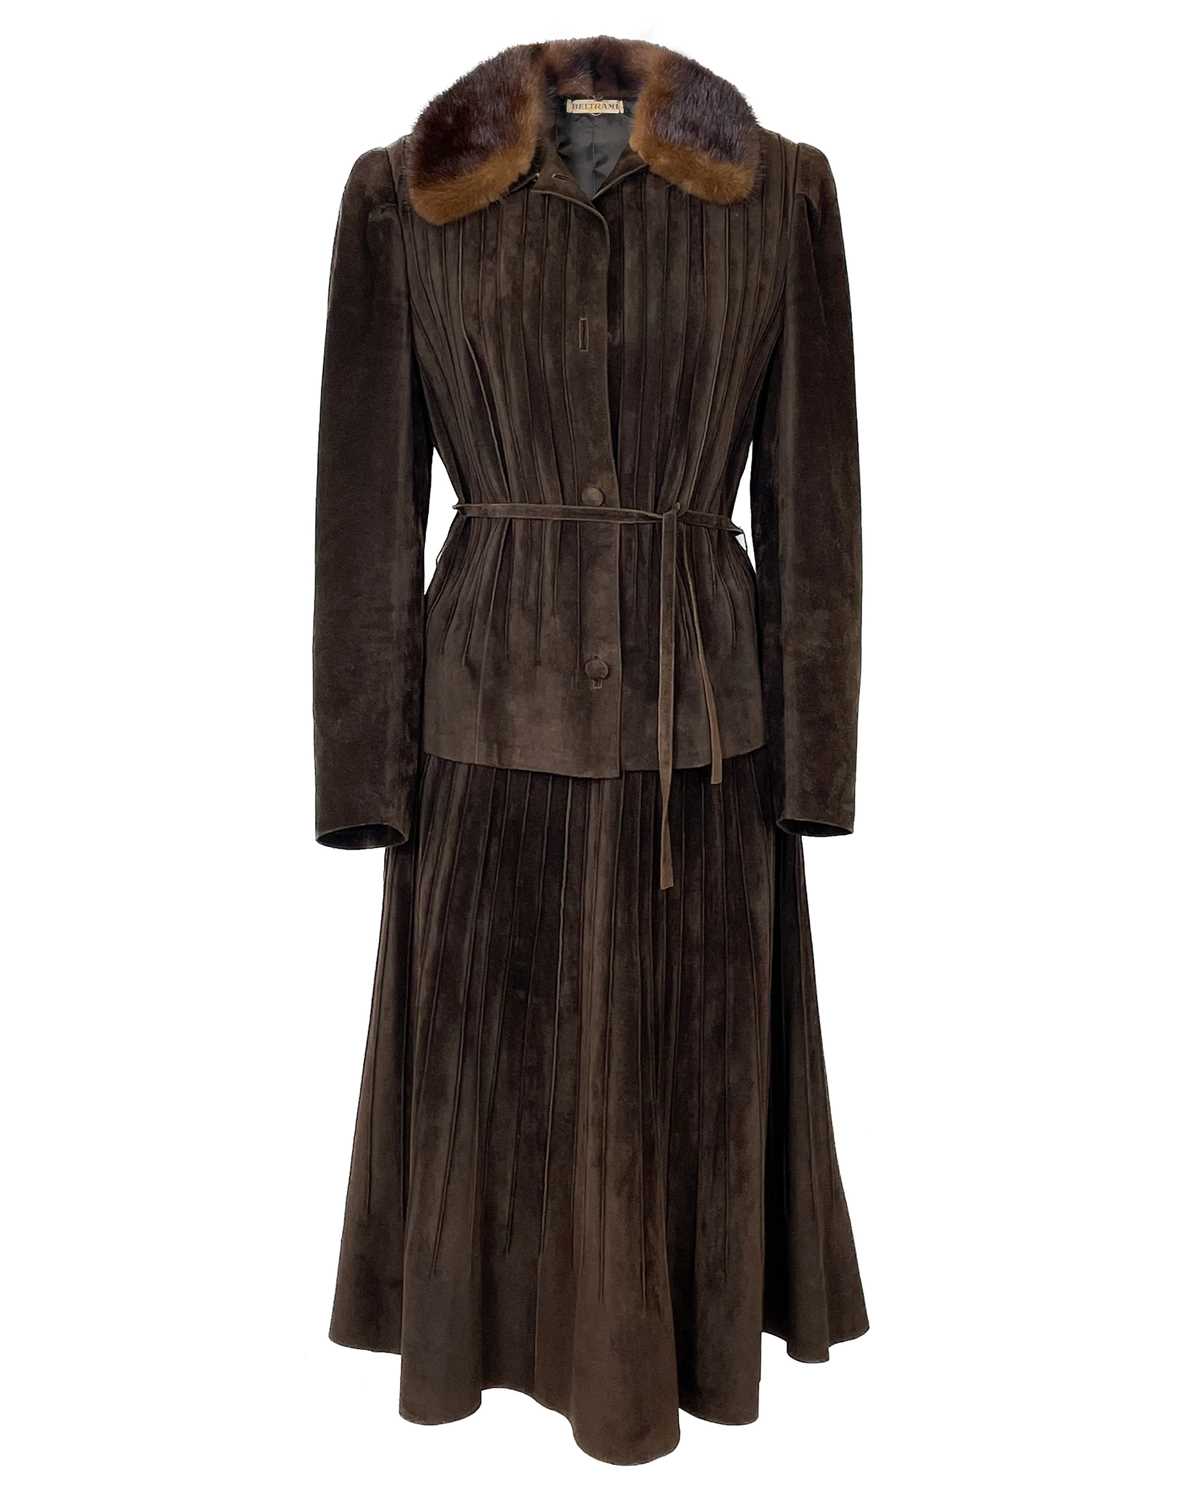 A Beltrami brown suede leather fitted jacket and skirt set.